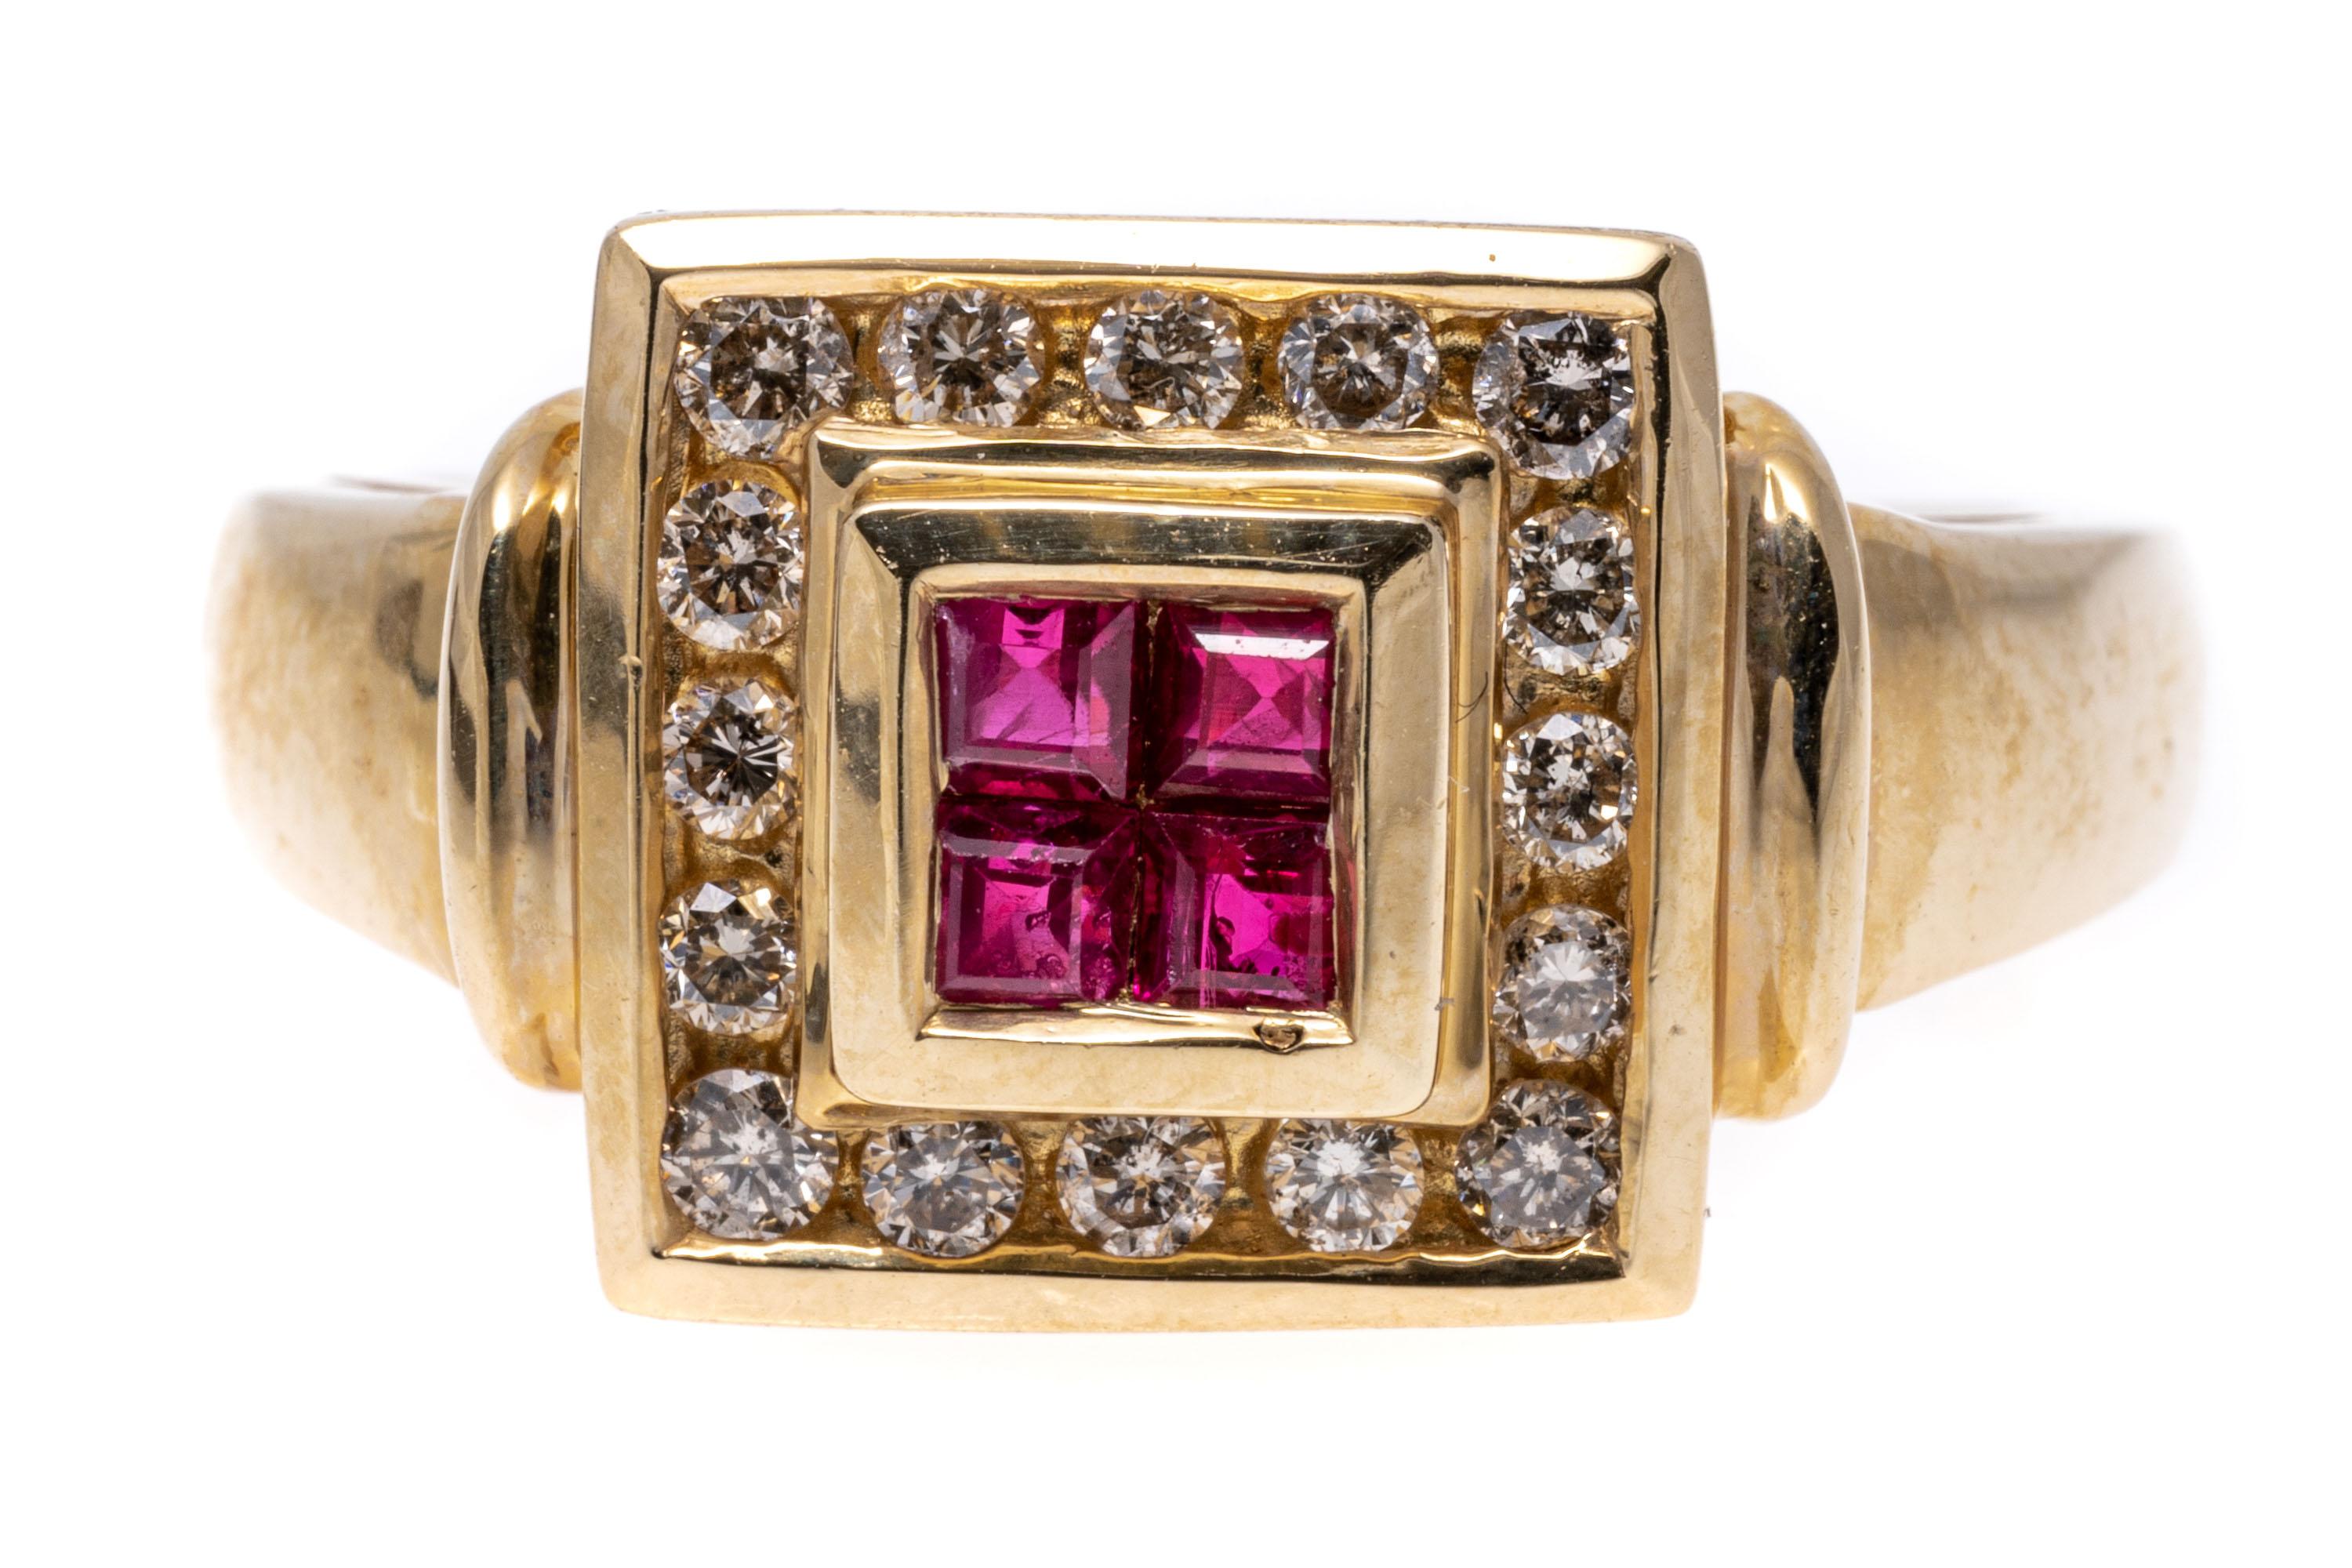 14k yellow gold ring. This handsome retro style ring is set with four square faceted, pinkish red color rubies, approximately 0.28 TCW, bezel set, and bordered with a frame of round faceted diamonds, approximately 0.16 TCW, also channel set. The